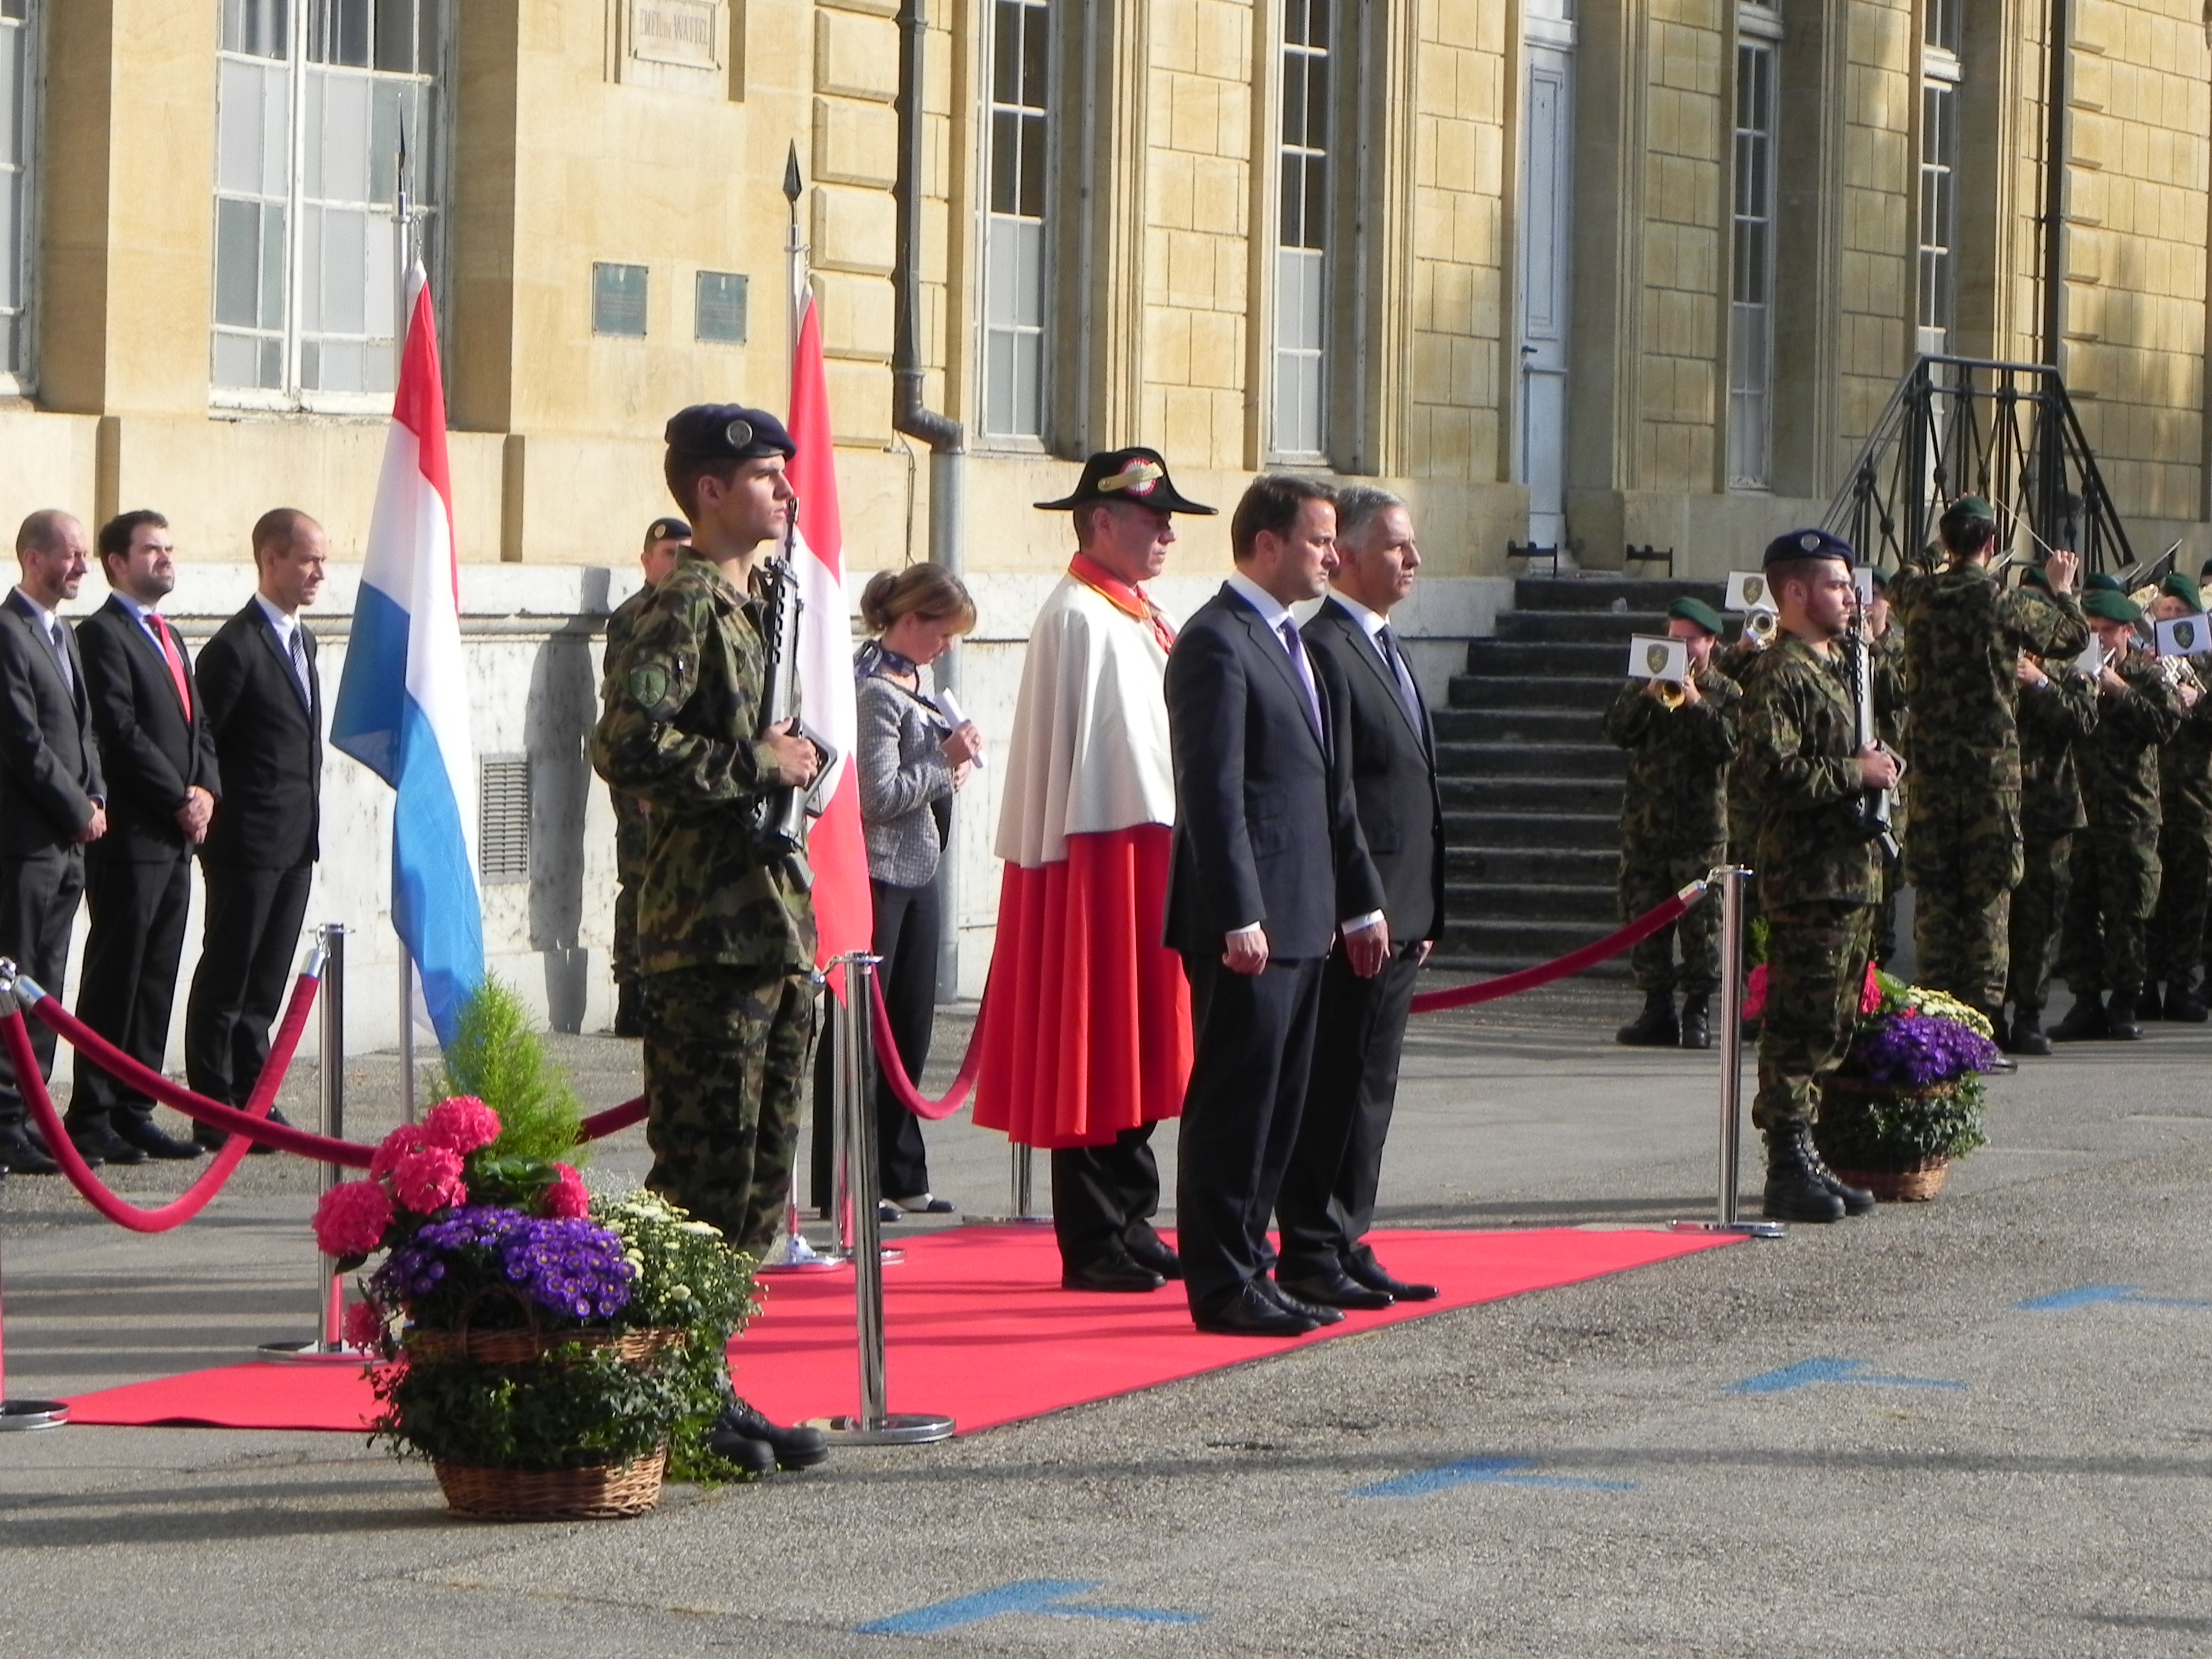 The prime minister of Luxembourg, Xavier Bettel, was received with military honours 